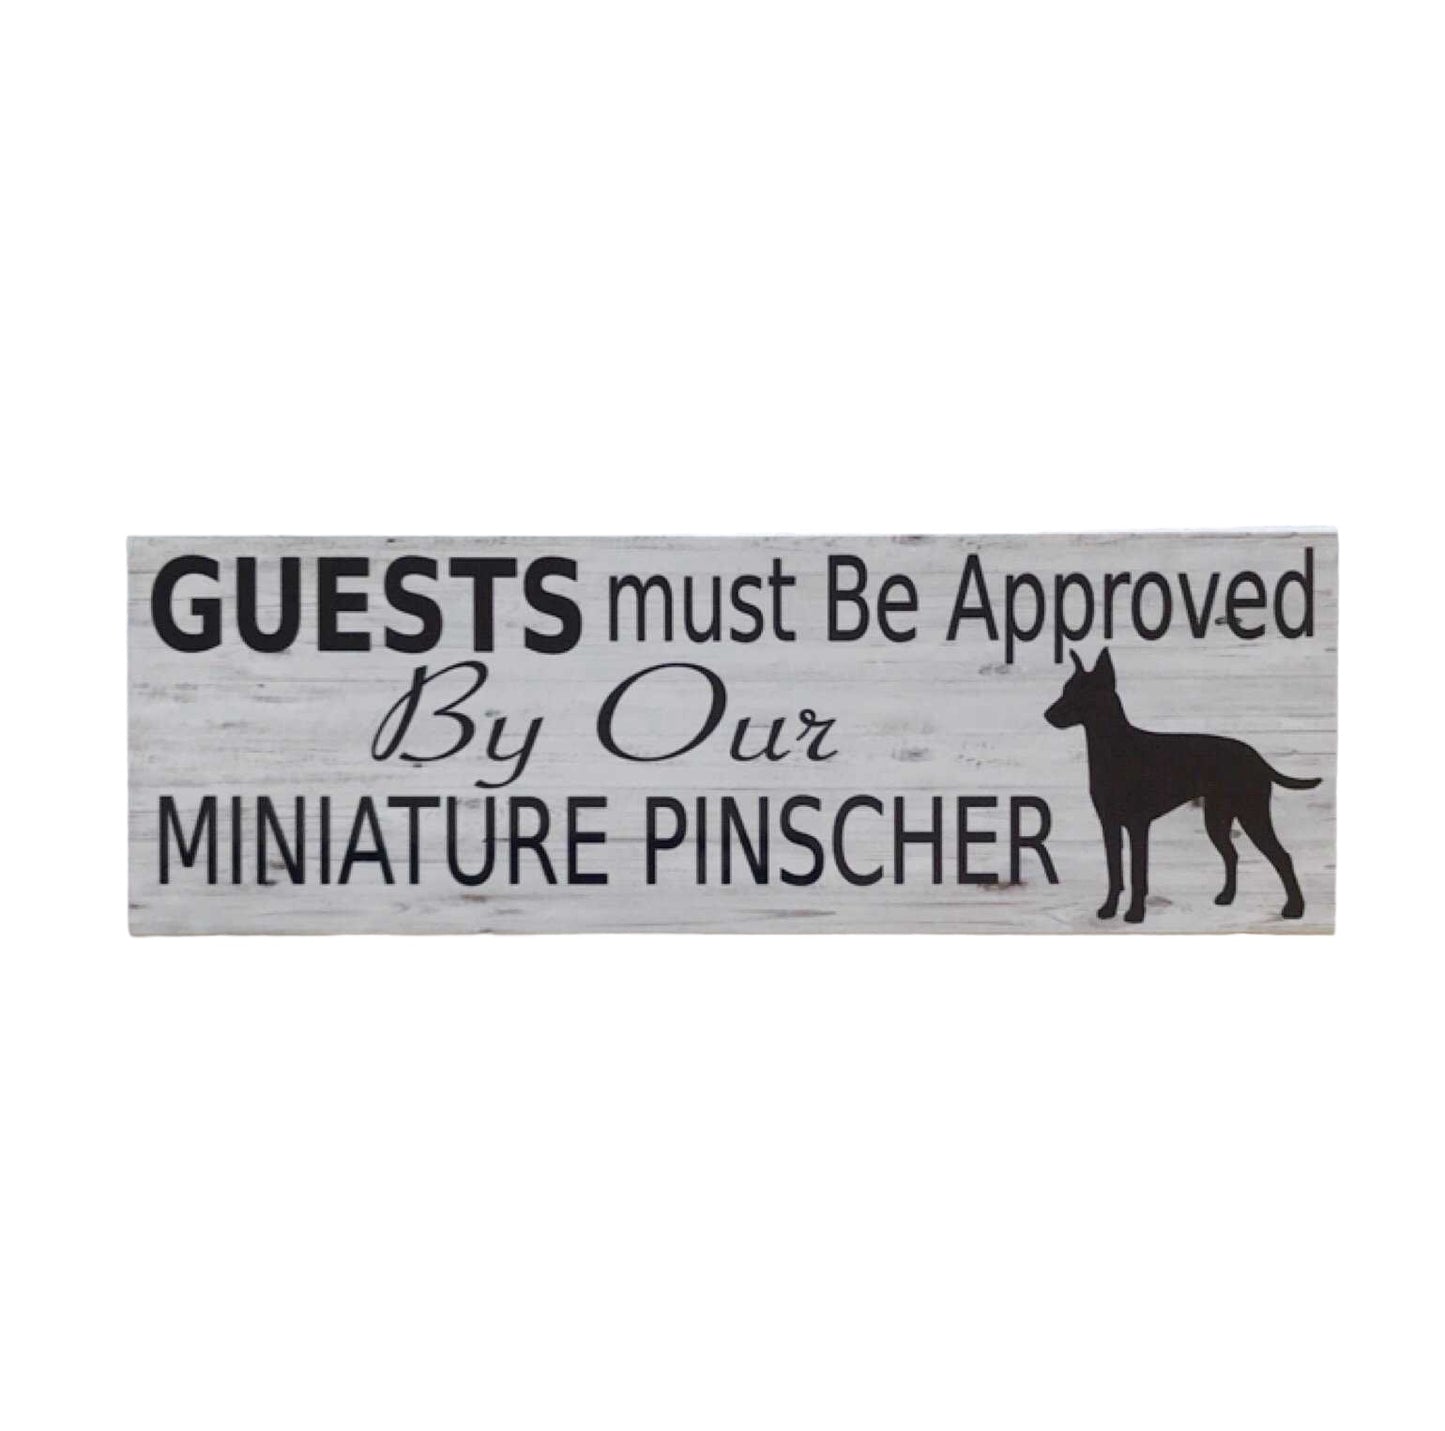 Miniature Pinscher Guests Must Be Approved By Our Sign - The Renmy Store Homewares & Gifts 